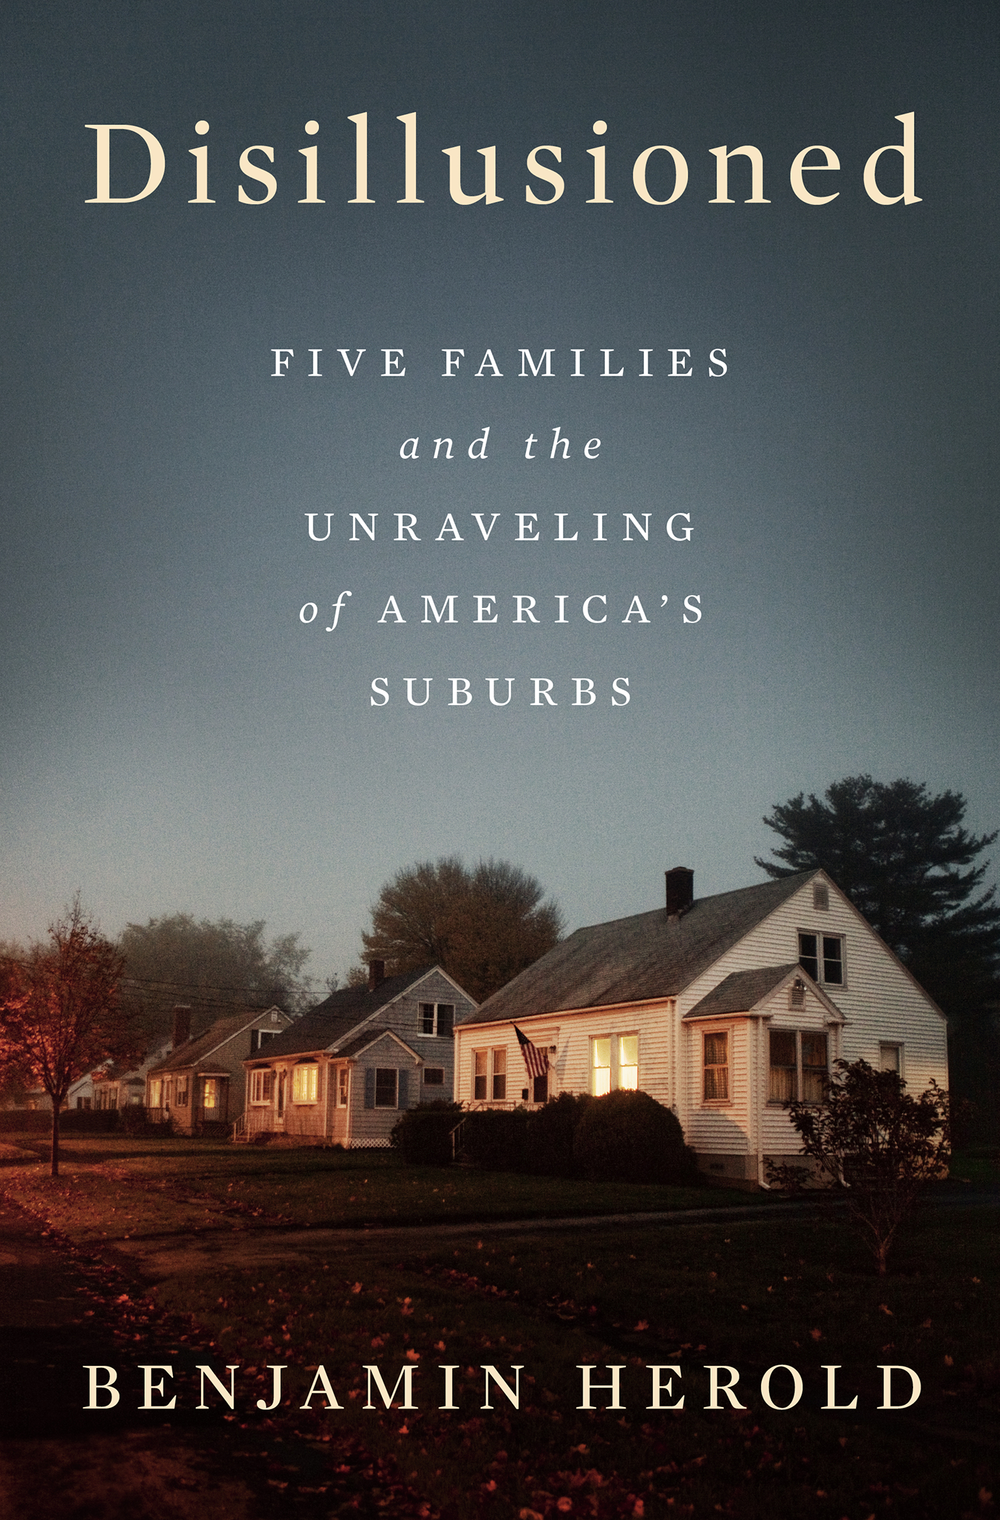 Disillusioned: Five Families and the Unraveling of America's Suburbs